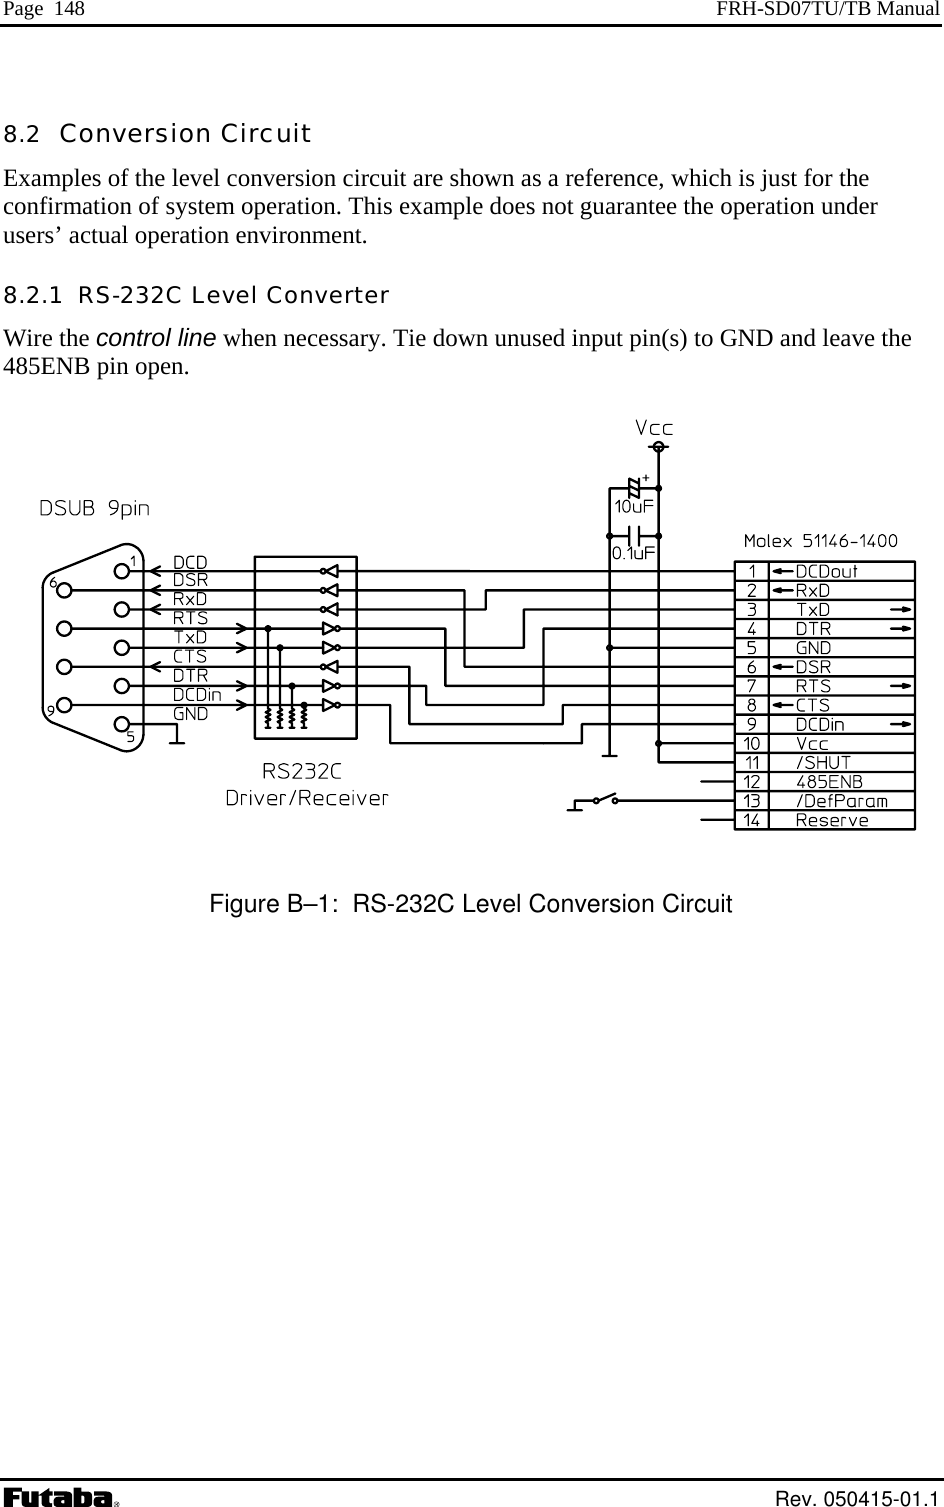 Page  148  FRH-SD07TU/TB Manual 8.2  Conversion Ci uiExamples of the level conversion circuit are shown as a reference, which is just for the onfirmation of system operation. This example does not guarantee the operation under users’ actual operation environment. e the  rc t c8.2.1  RS-232C Level Converter Wire the control line when necessary. Tie down unused input pin(s) to GND and leav485ENB pin open.   Figure B–1:  RS-232C Level Conversion Circuit  Rev. 050415-01.1 